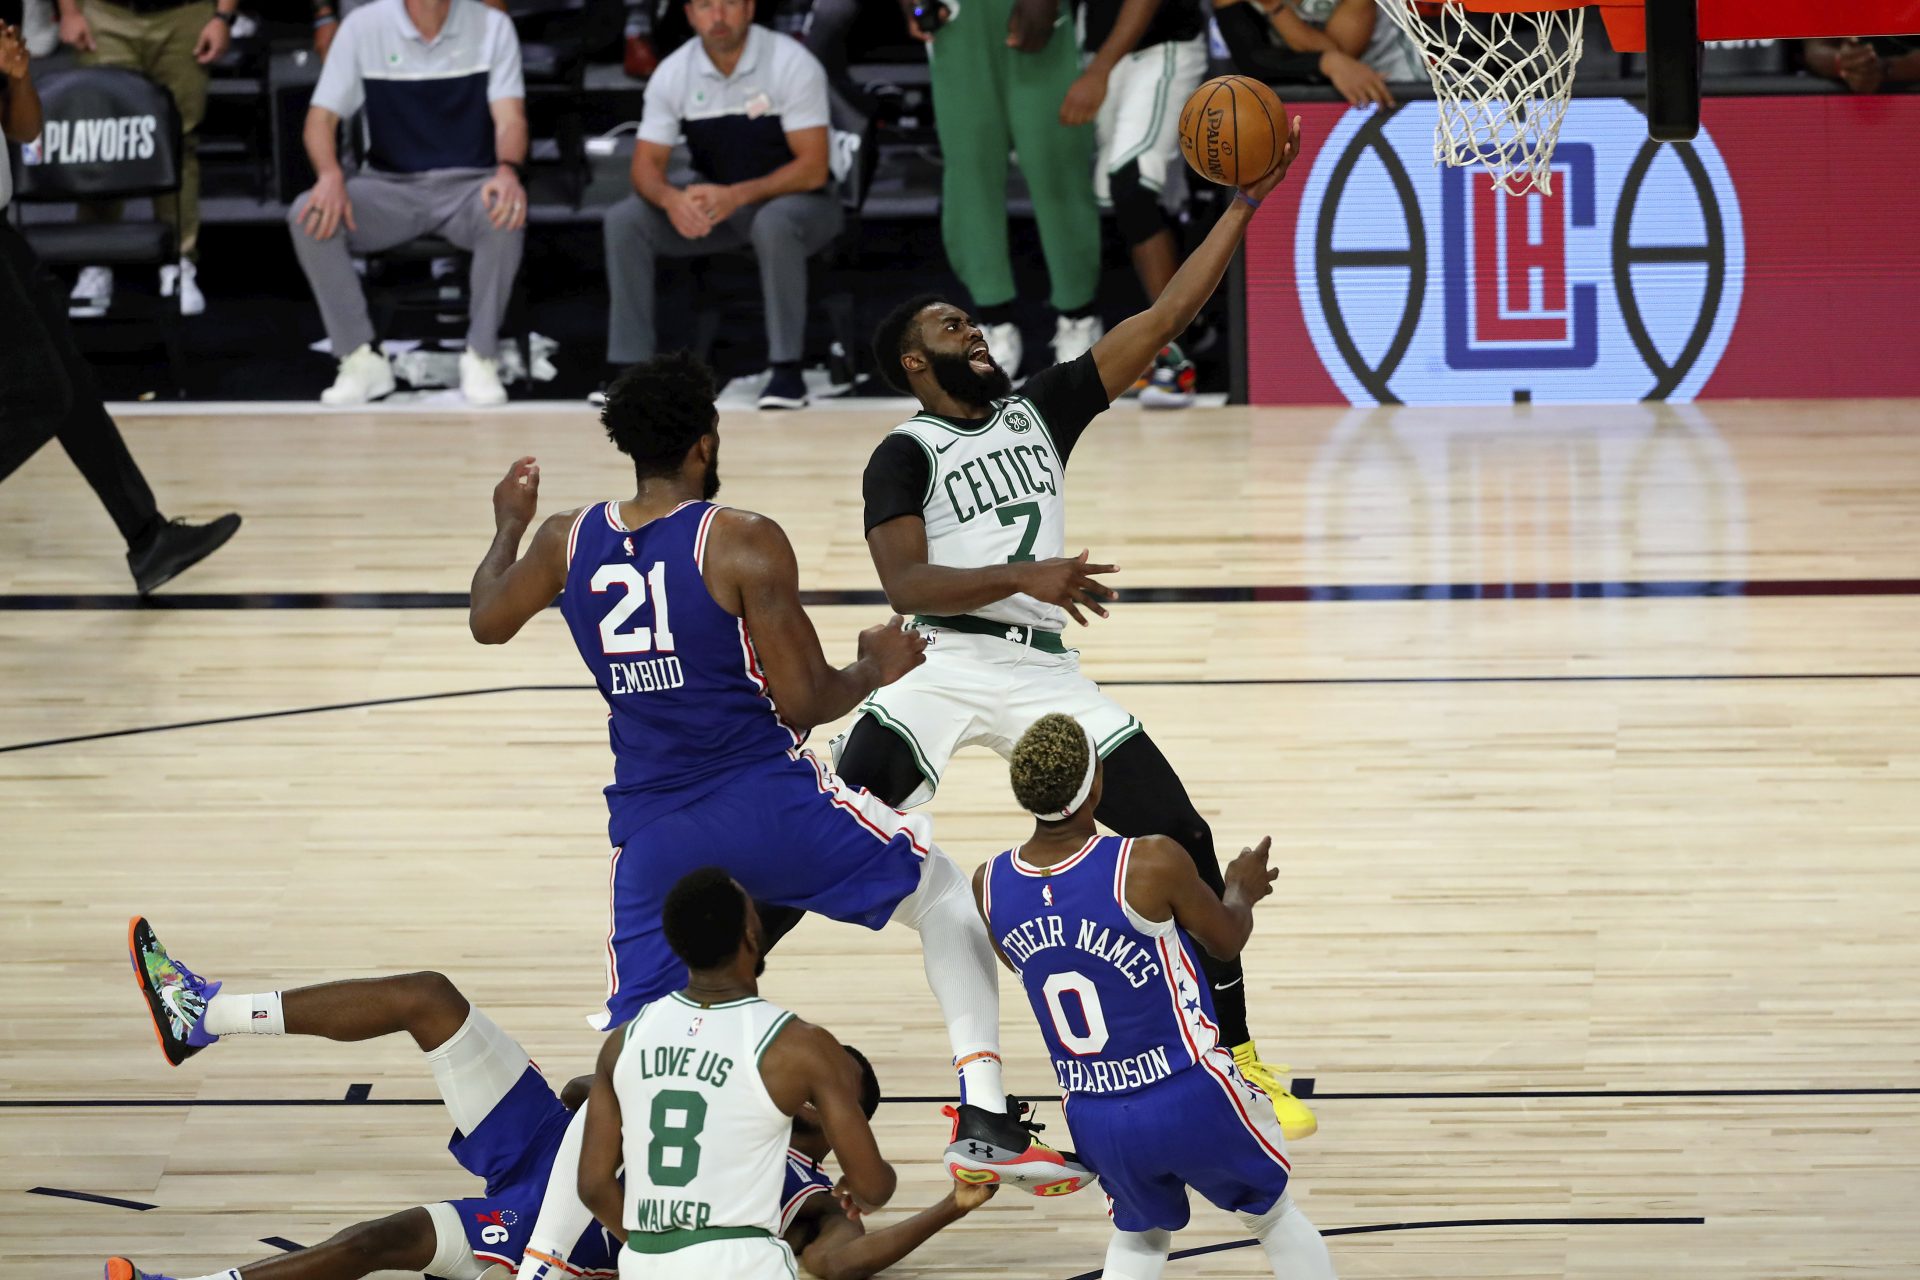 Boston Celtics guard Jaylen Brown (7) shoots the ball ahead of Philadelphia 76ers center Joel Embiid (21) during the second half in Game 3 of an NBA basketball first-round playoff series, Friday, Aug. 21, 2020, in Lake Buena Vista, Fla.